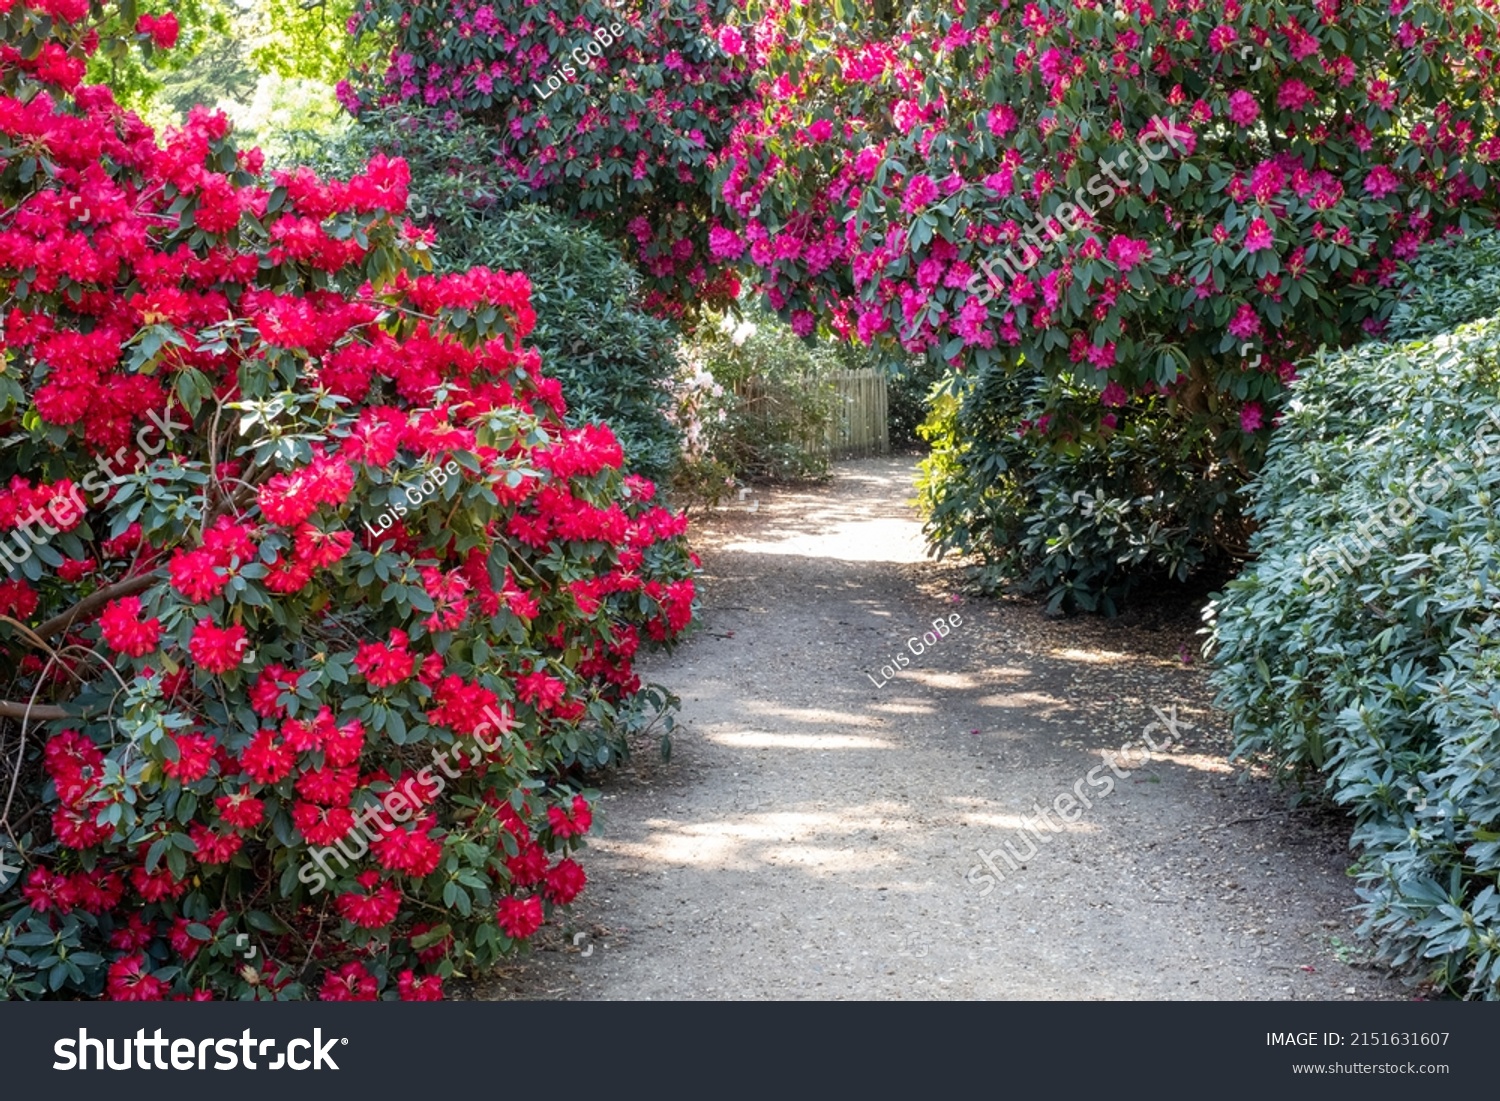 Tunnel of brightly coloured pink rhododendron flowers, photographed in late spring in Temple Gardens, Langley Park, Slough UK. #2151631607